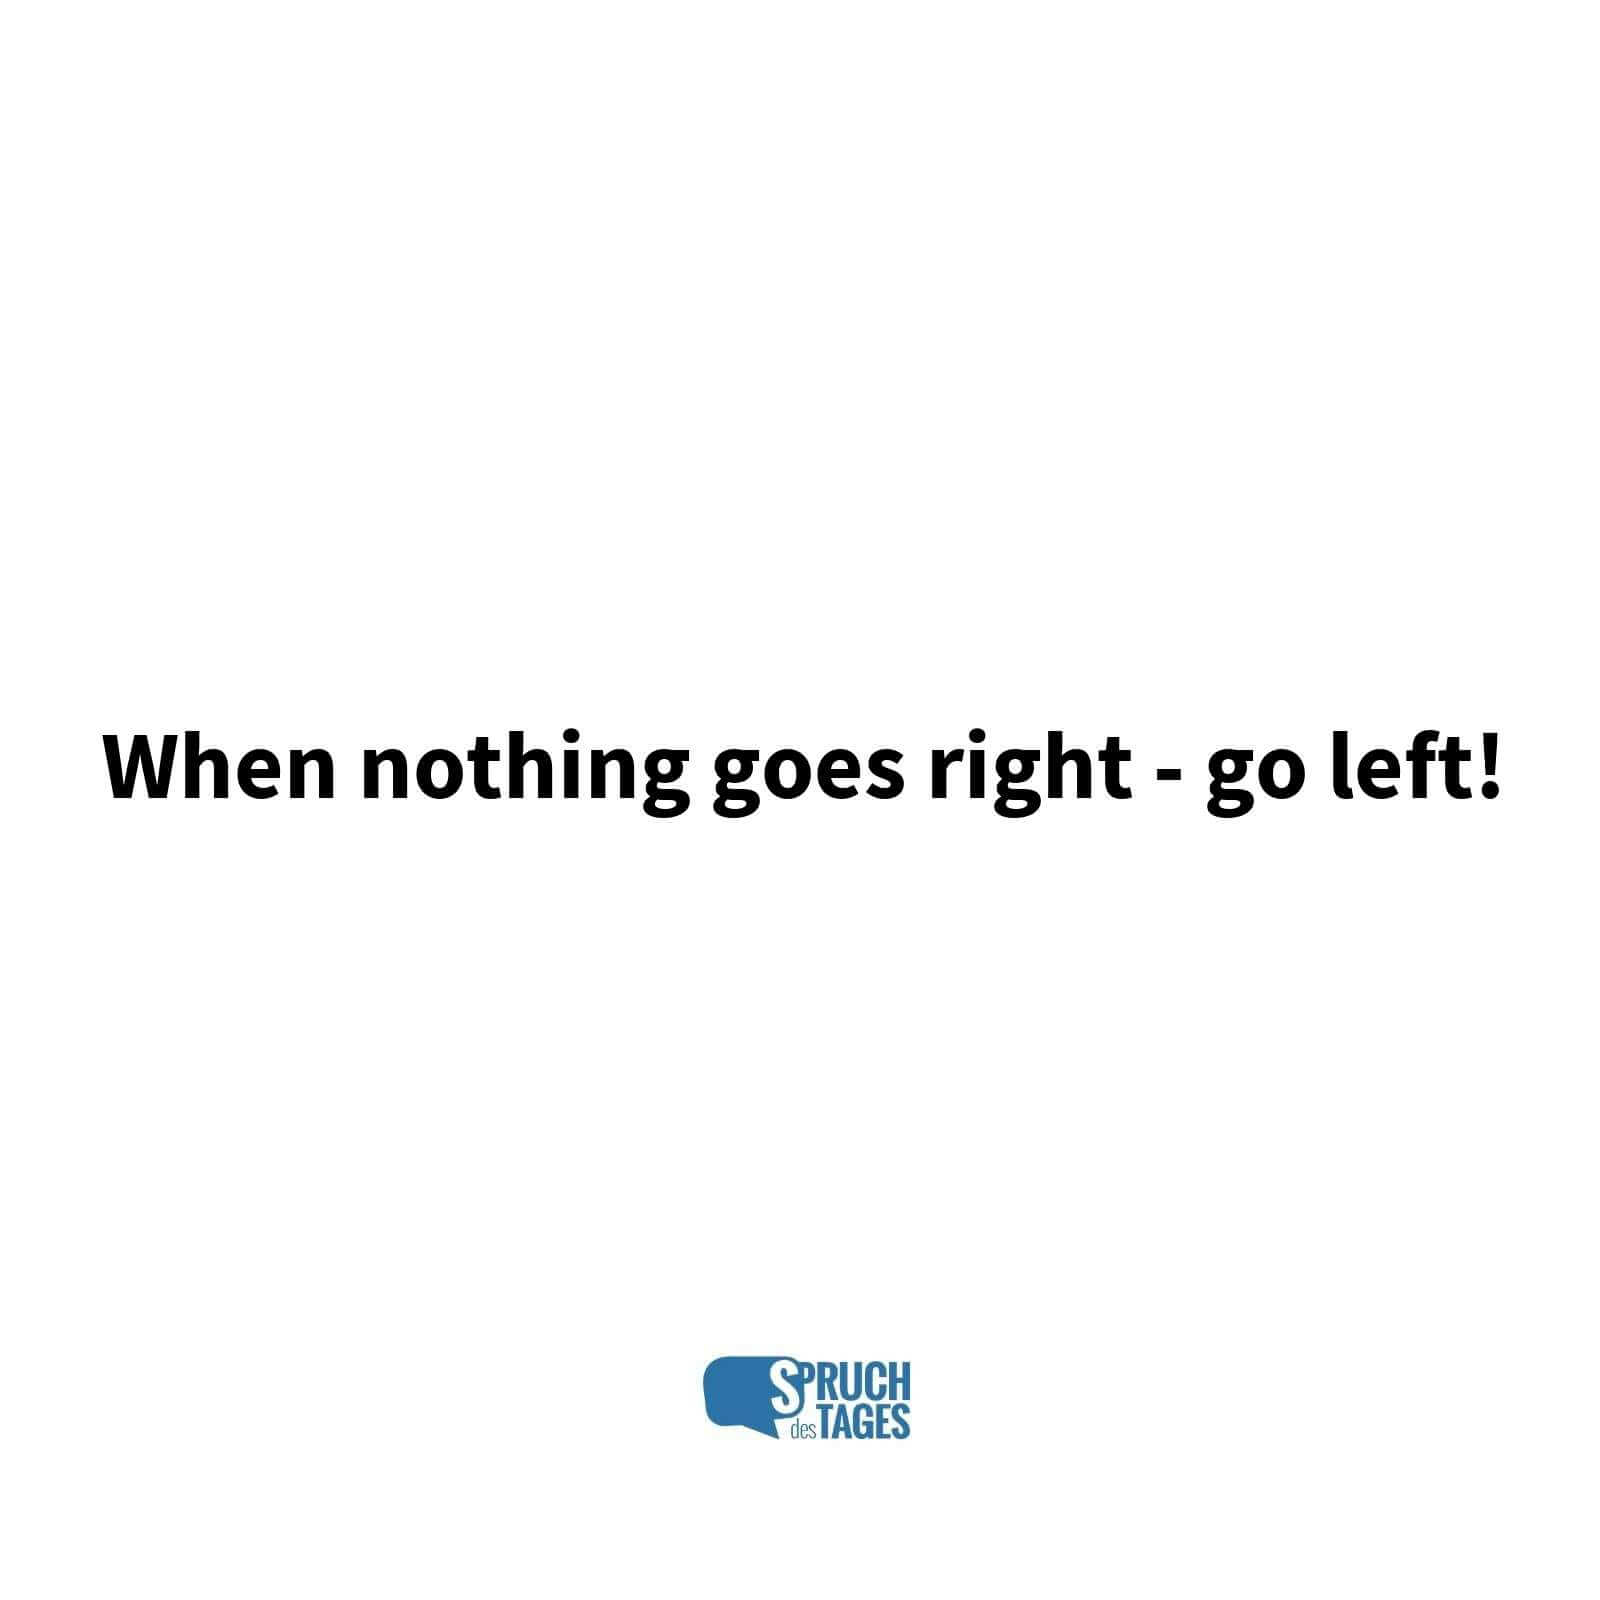 When nothing goes right – go left!